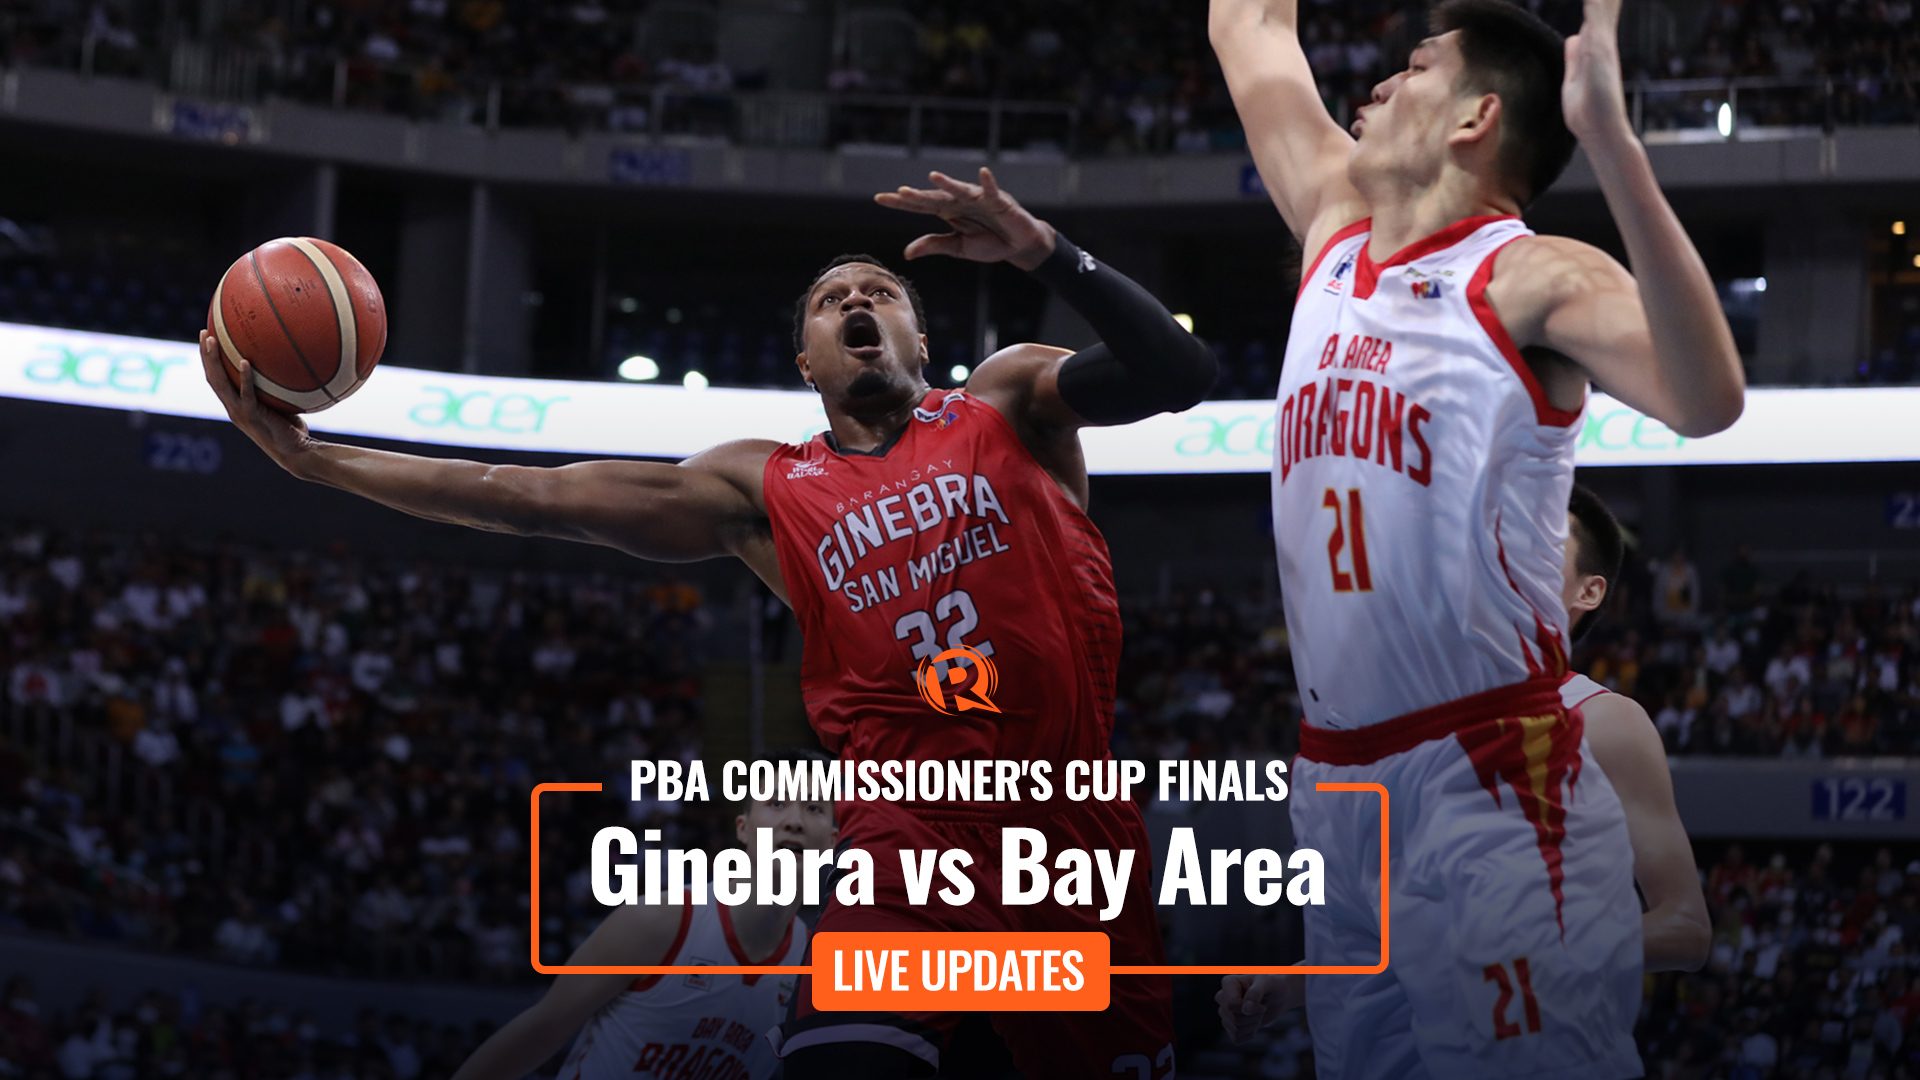 HIGHLIGHTS: Ginebra vs Bay Area, Game 6 – PBA Commissioner’s Cup finals 2022-2023